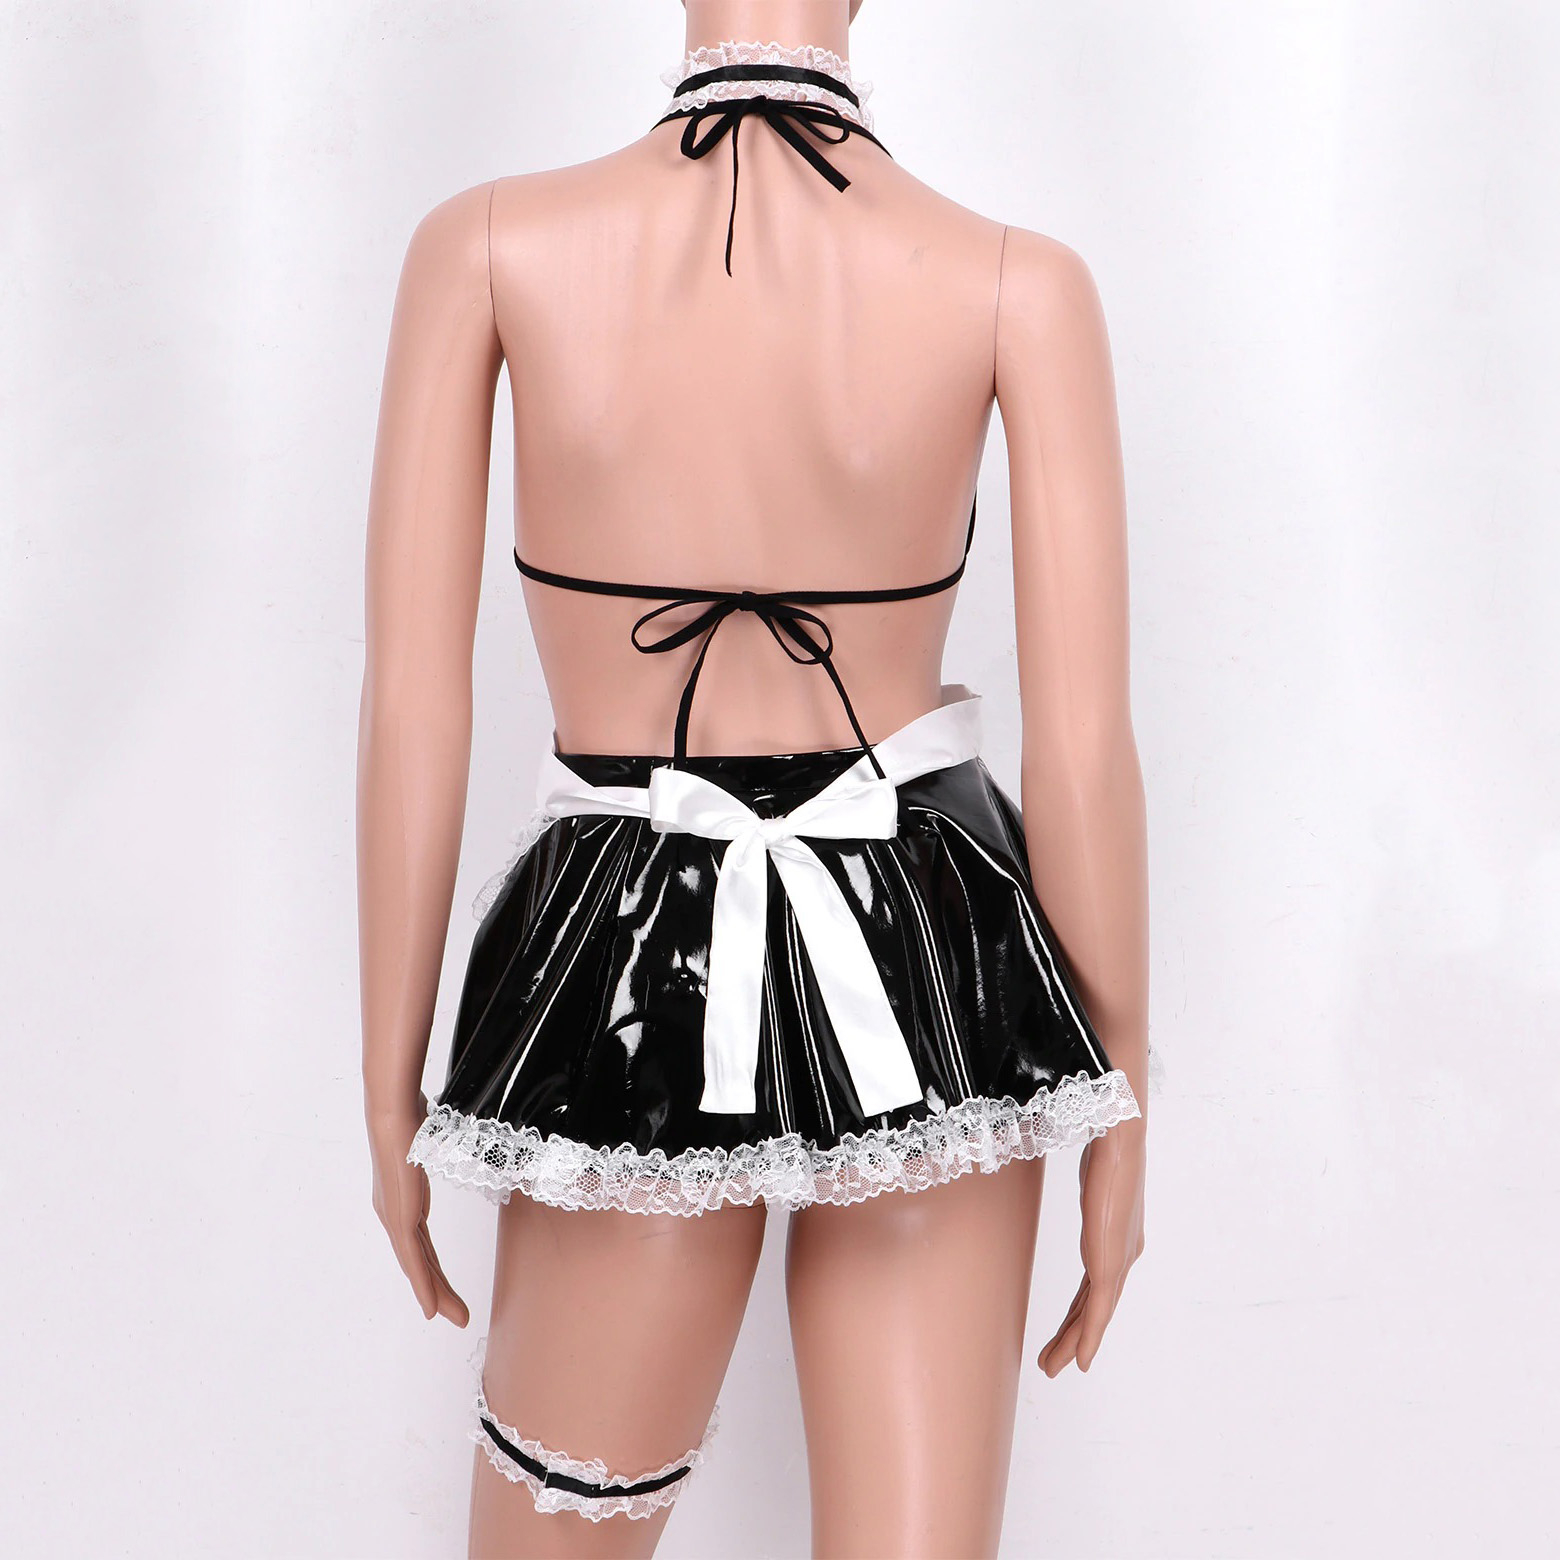 Women Fancy Cosplay Maid Dress / Sexy Exotic Halloween Costume / Bra Top With Skirt And G-Strings - EVE's SECRETS